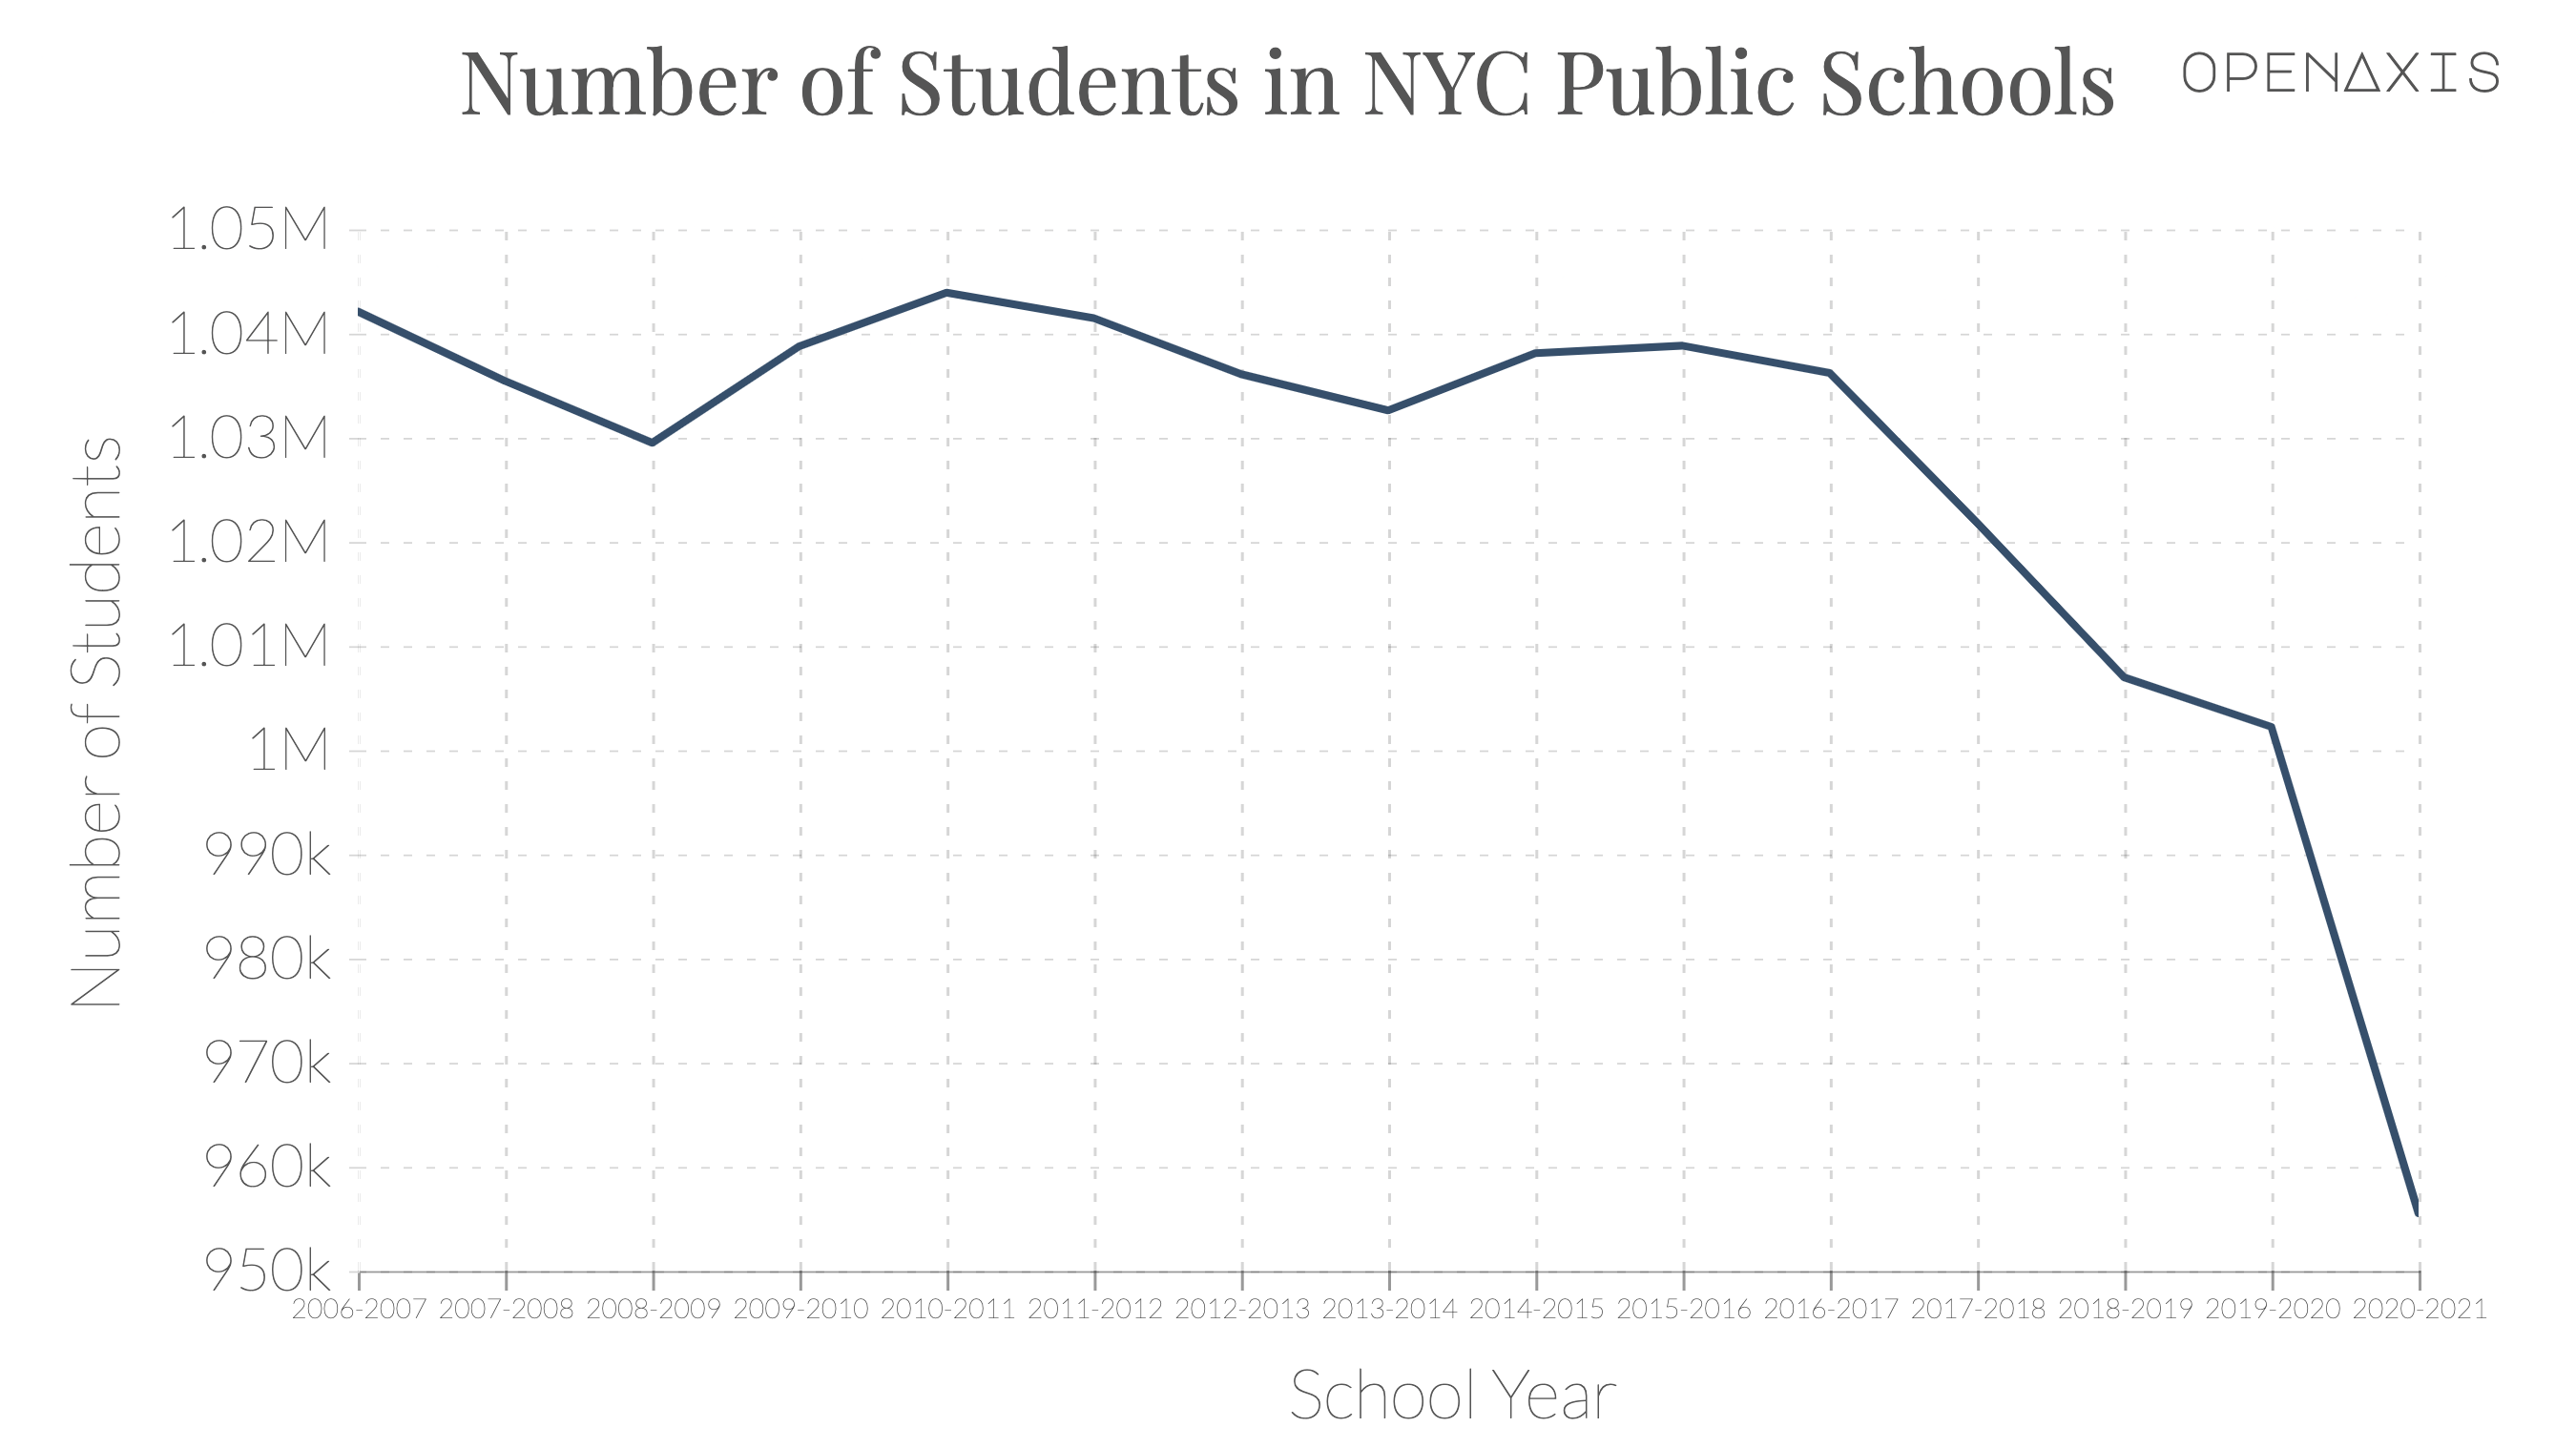 "Number of Students in NYC Public Schools"